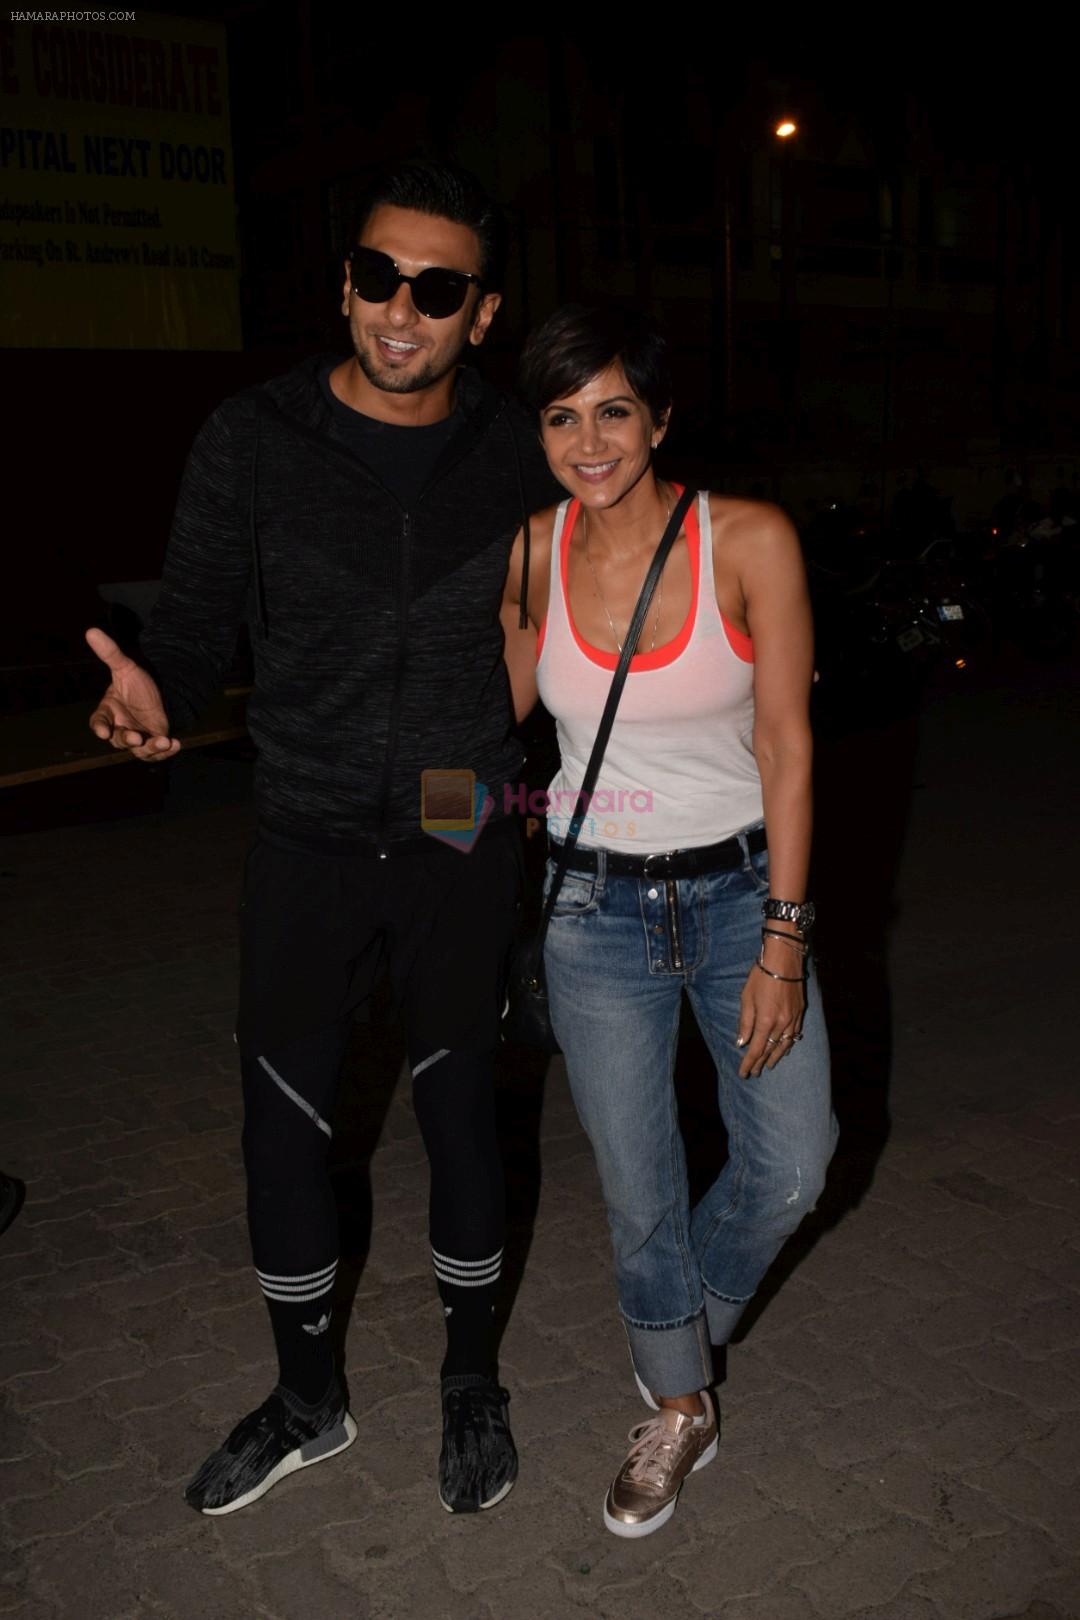 Ranveer Singh, Mandira Bedi at Roots Premiere League Spring Season 2018 For Amateur Football In India on 14th March 2018